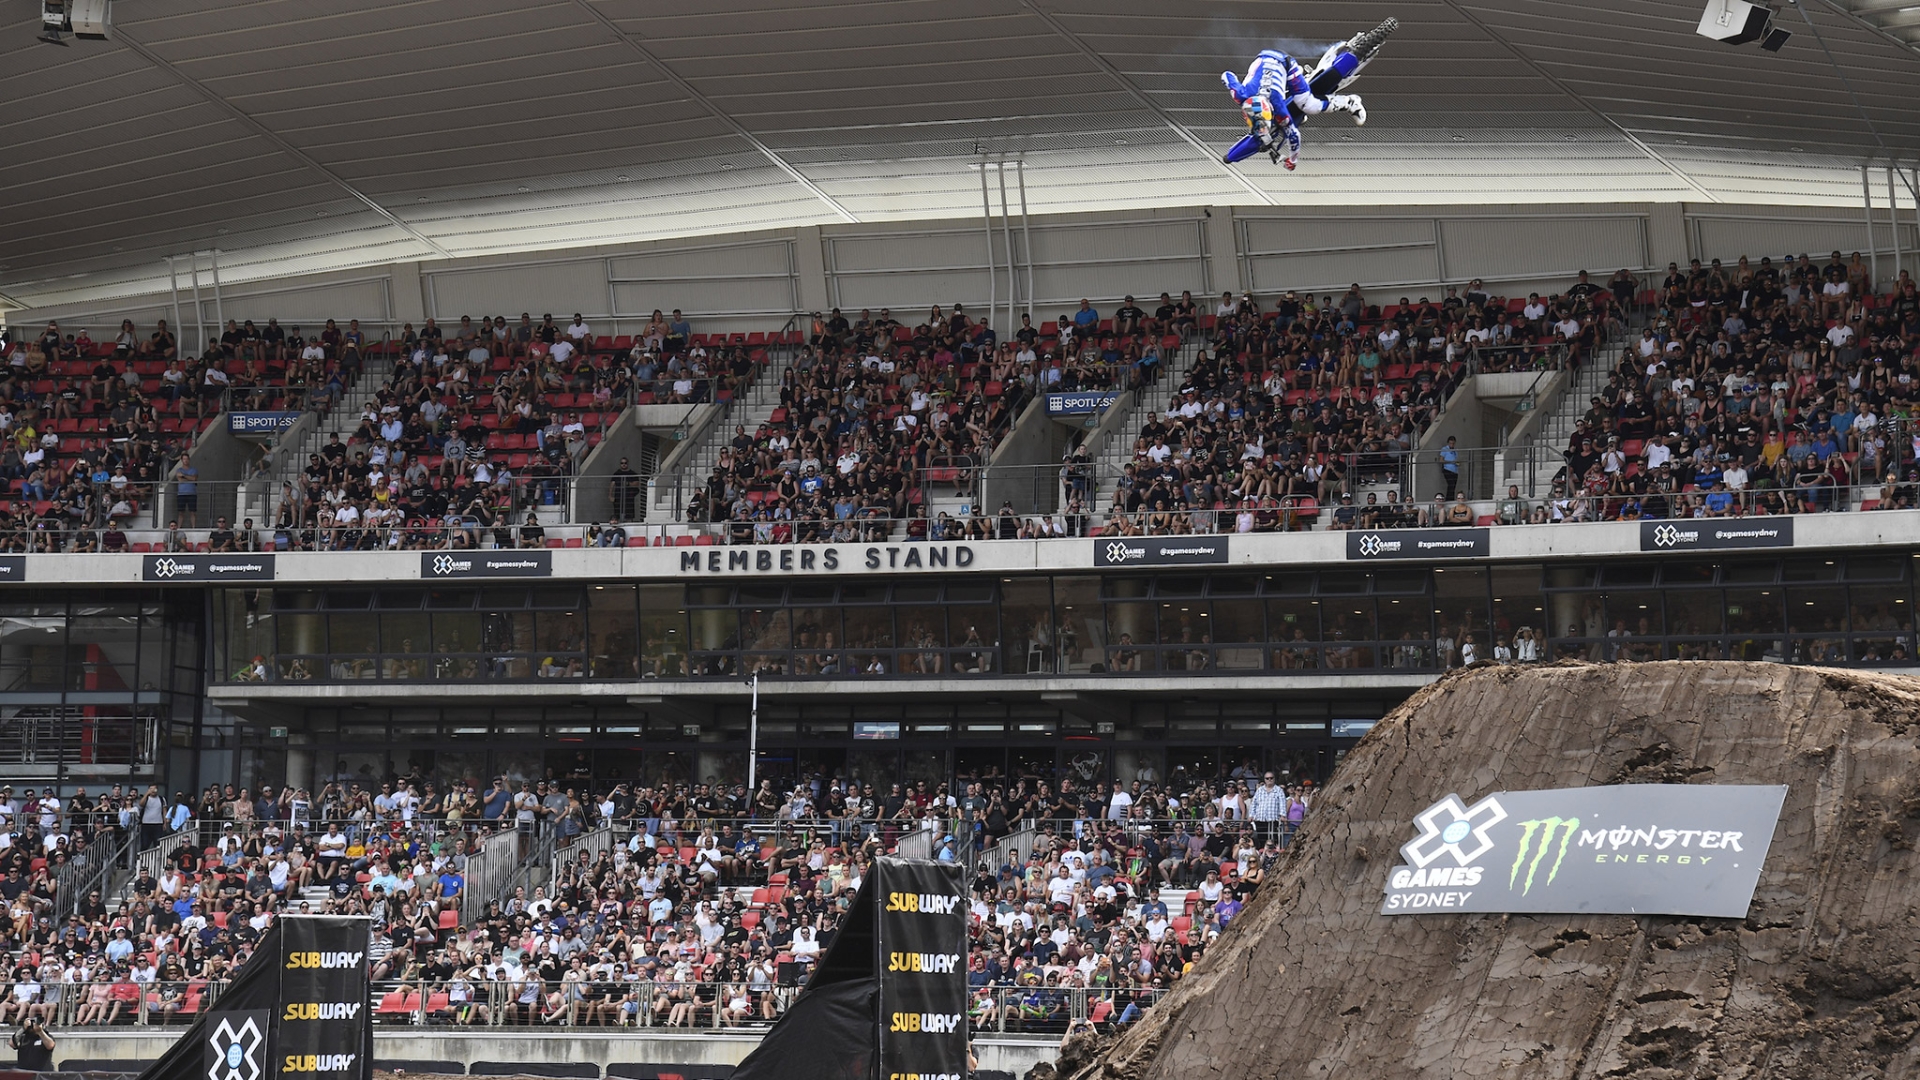 Tom Pages wins Moto X Freestyle gold